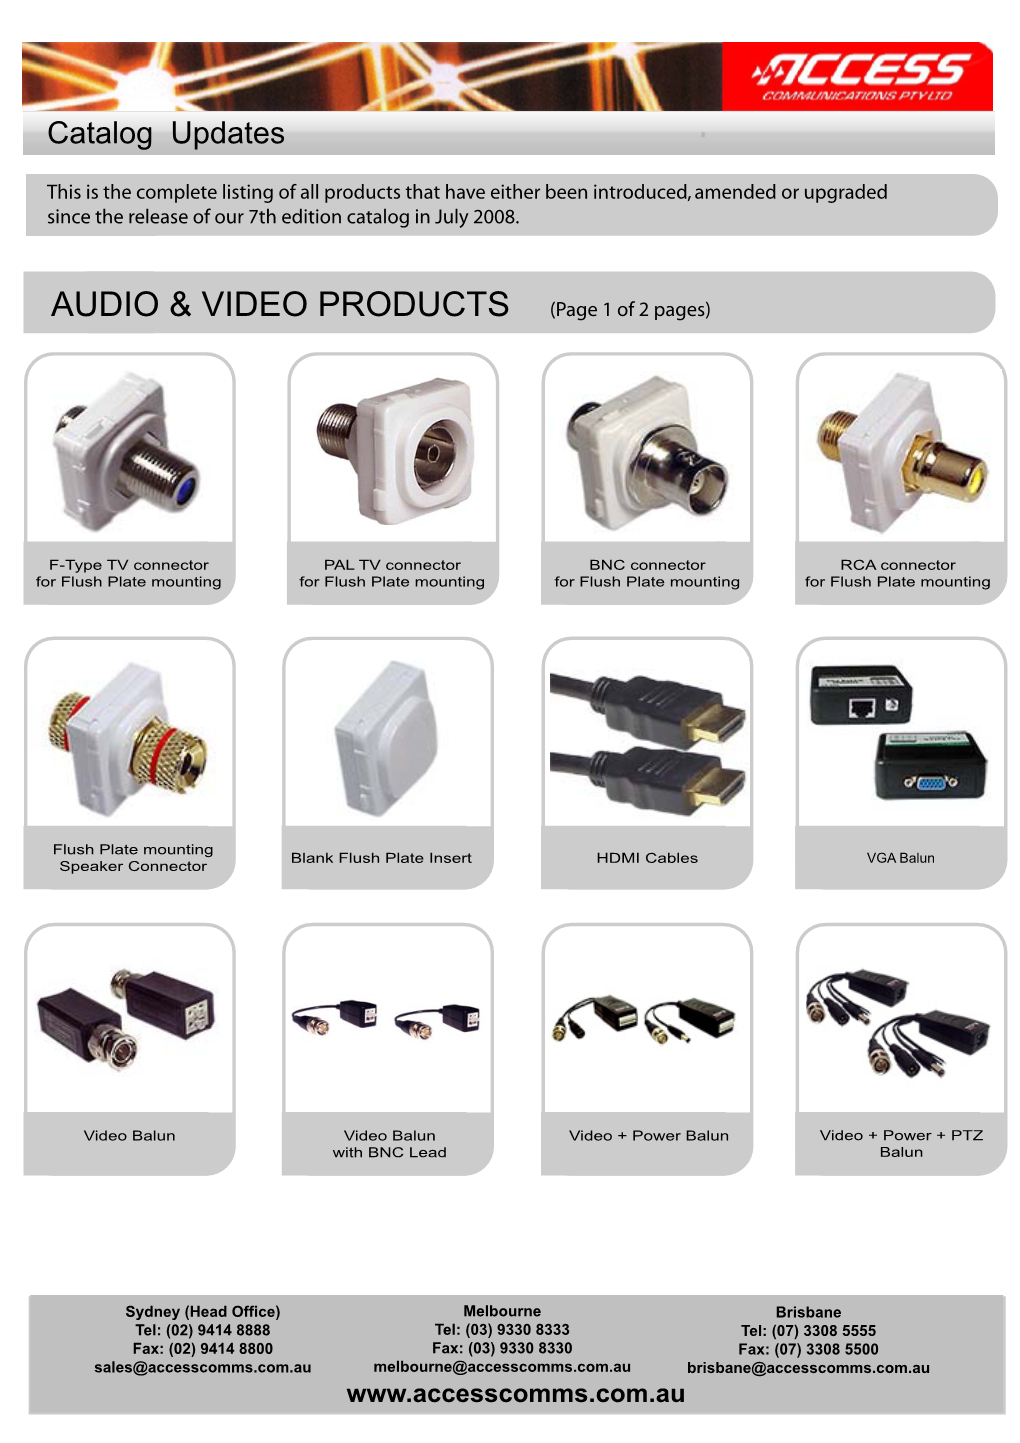 Audio & Video Products